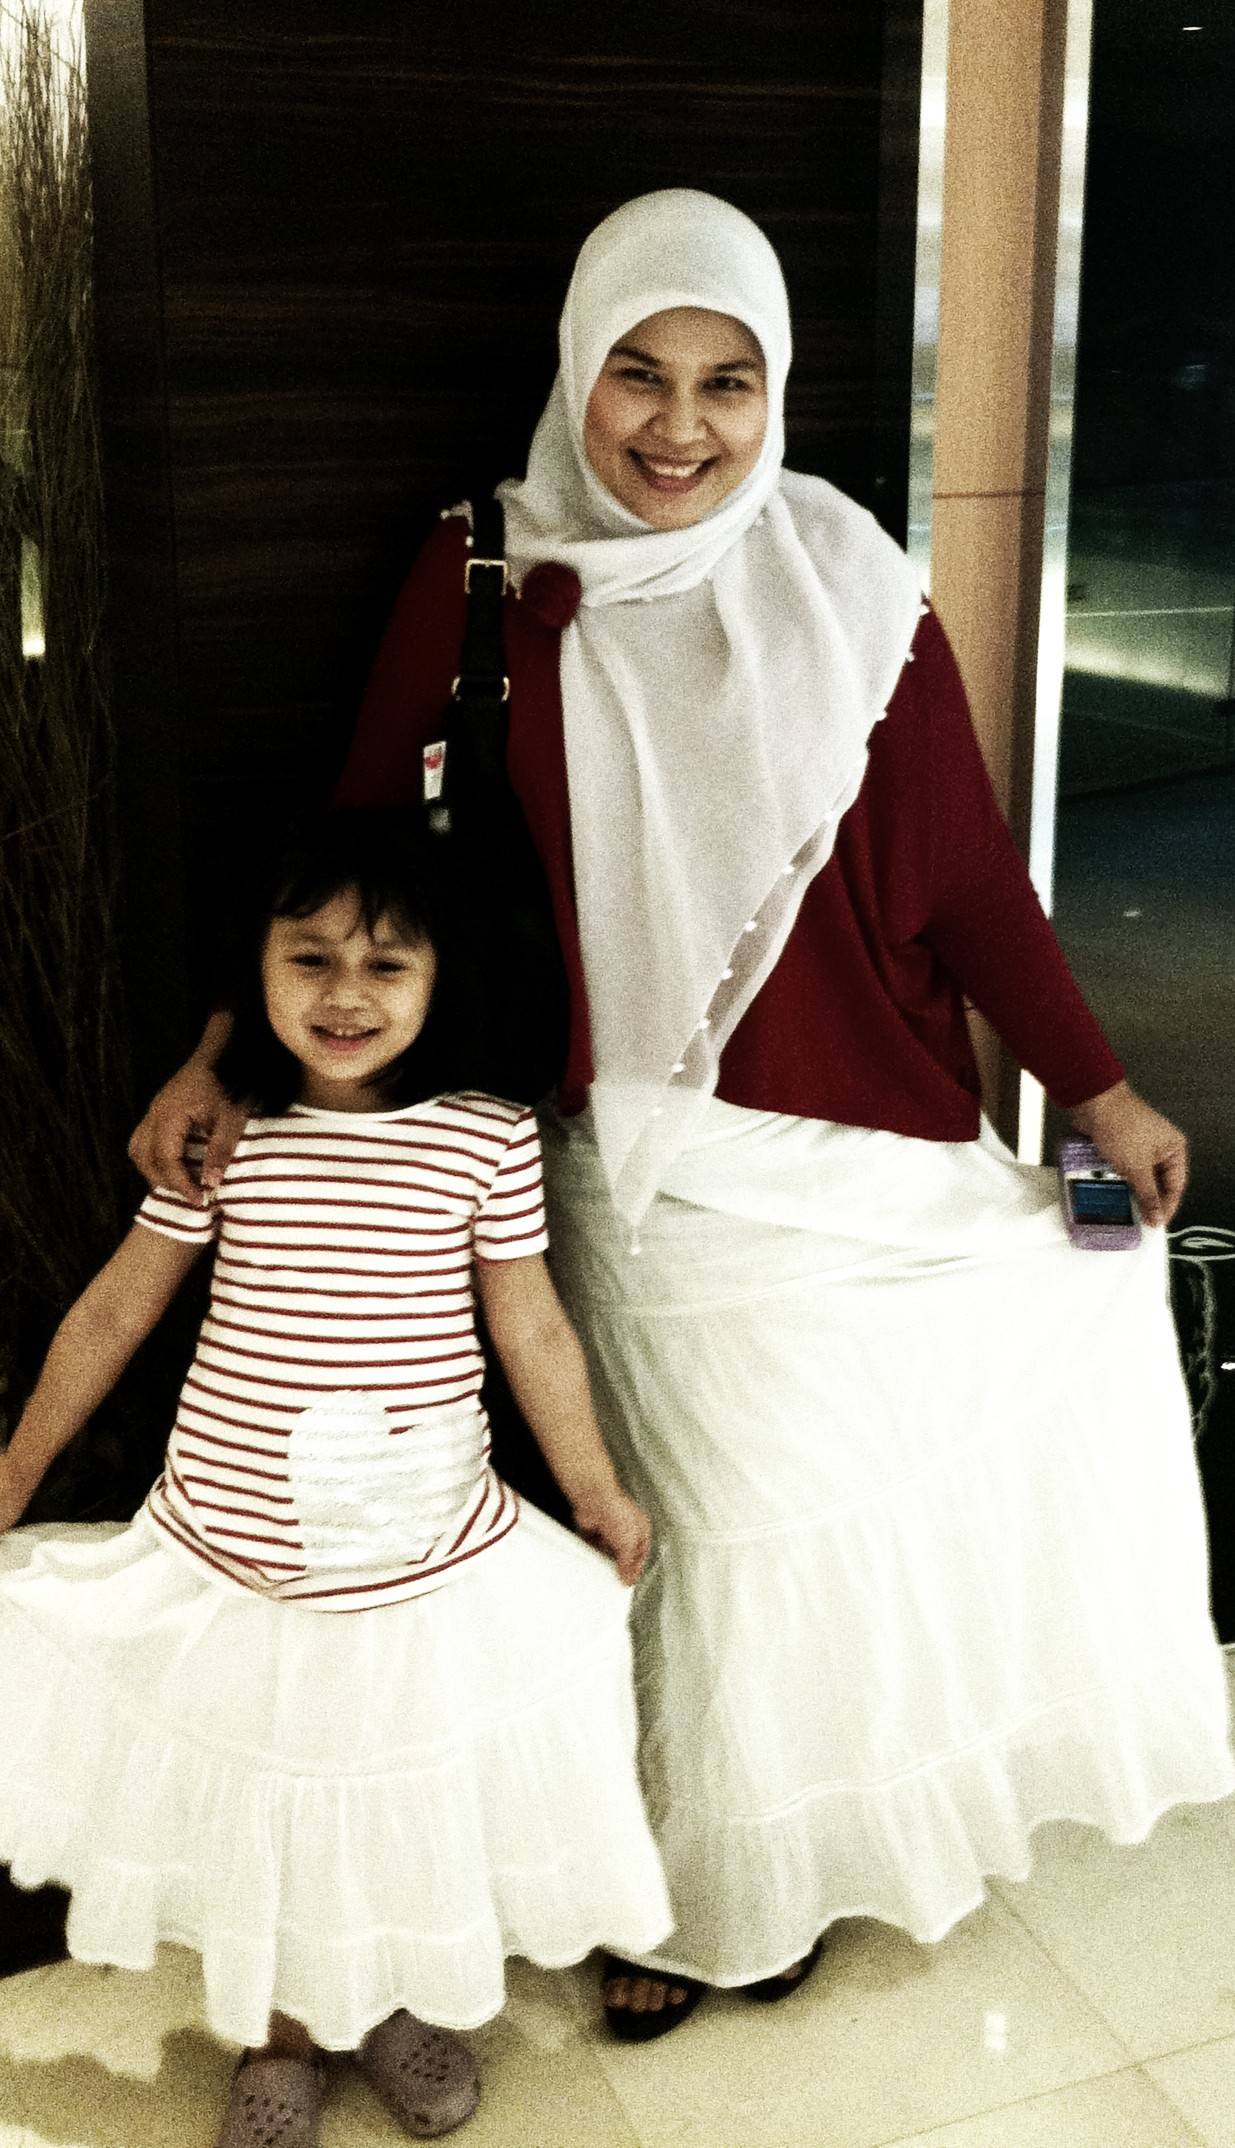 Today's Outfit: Our White Skirt ;)